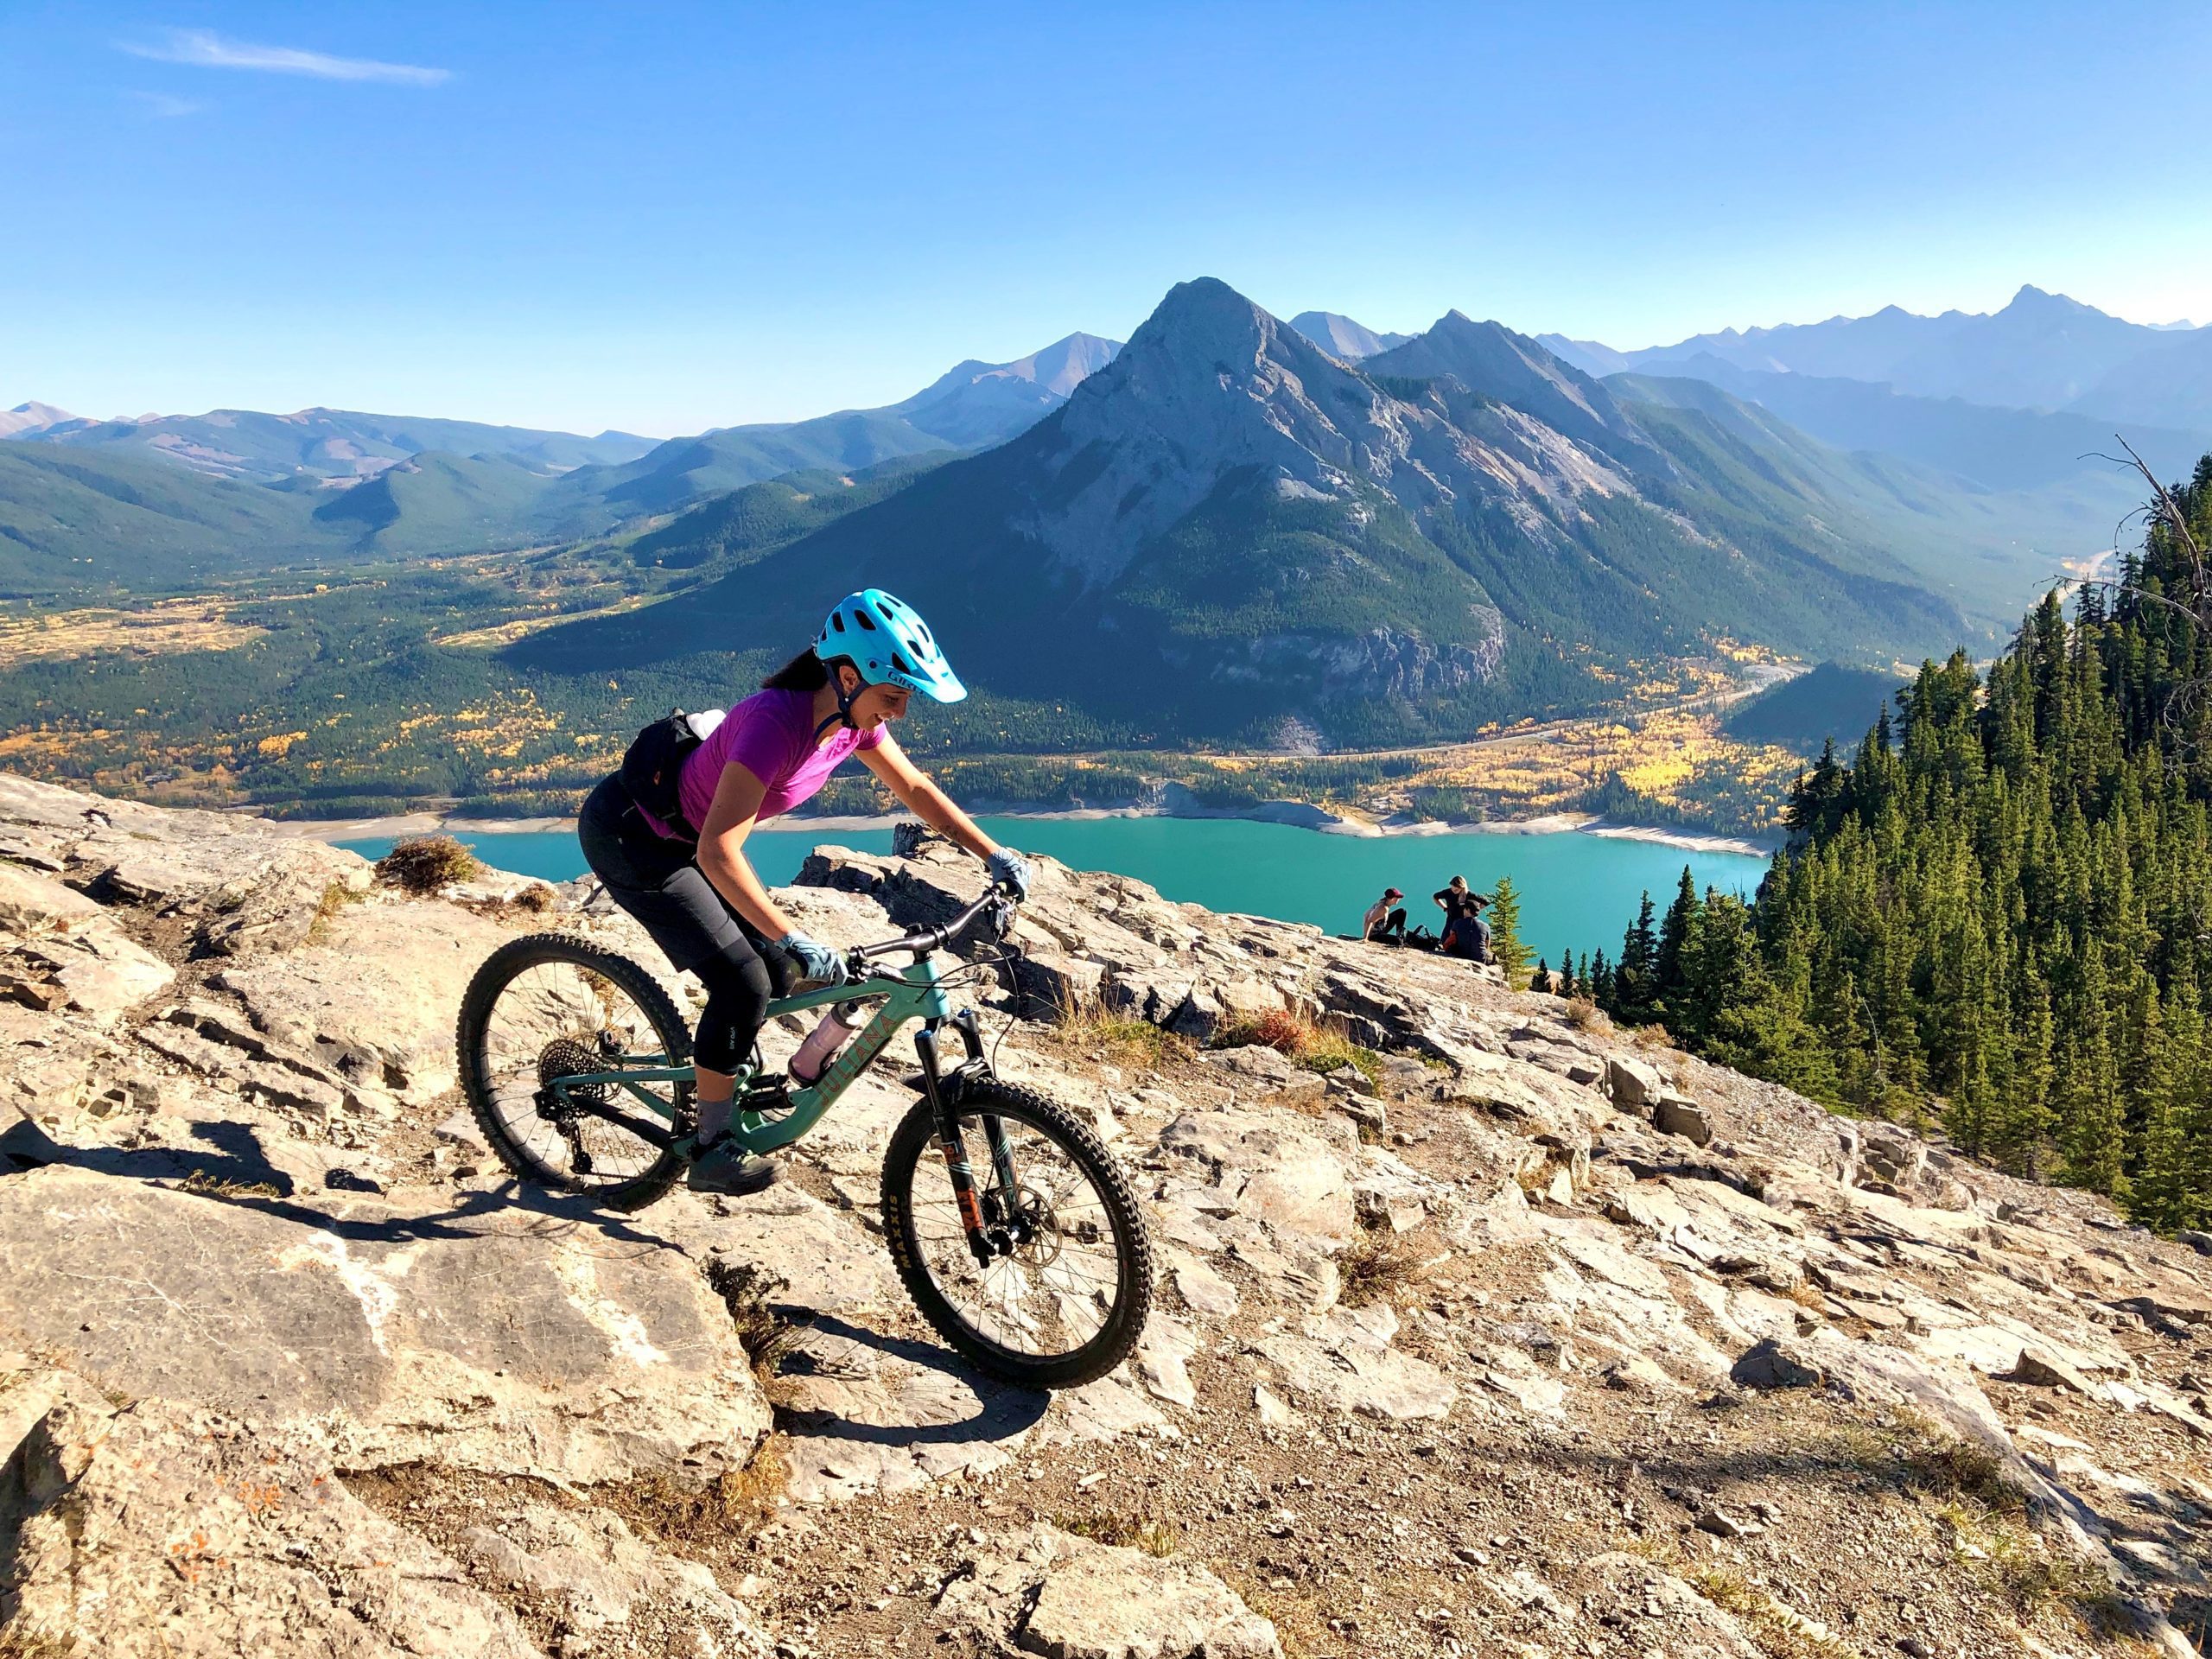 A woman mountain biking with a lake and mountain view in the background